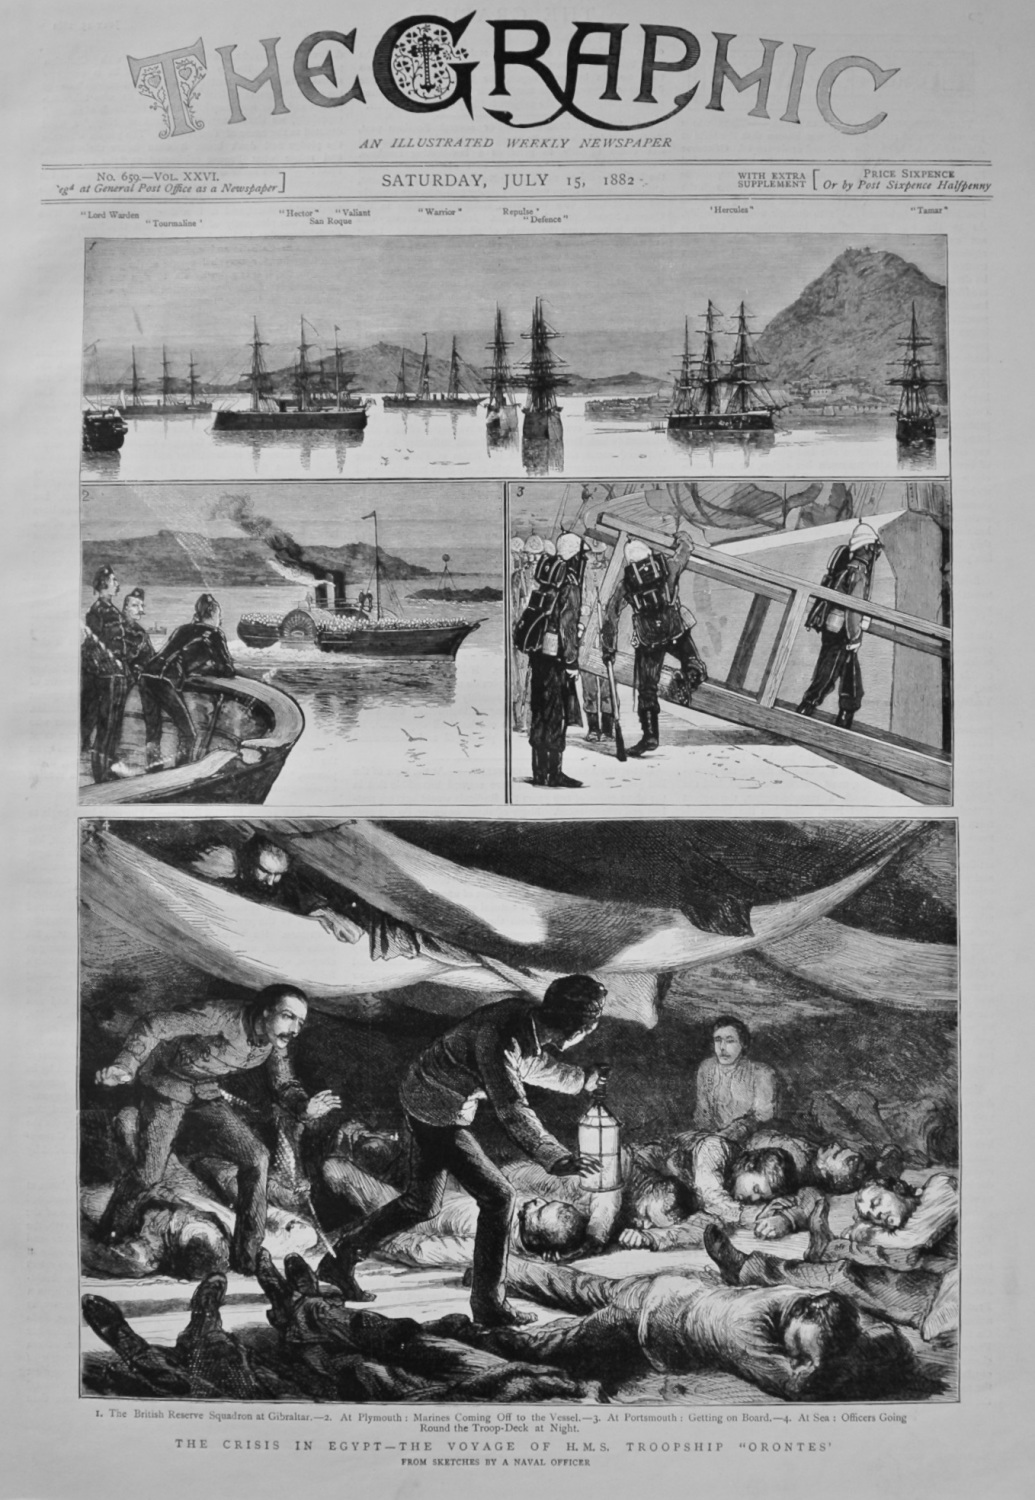 The Crisis in Egypt - The Voyage of H.M.S. Troopship 